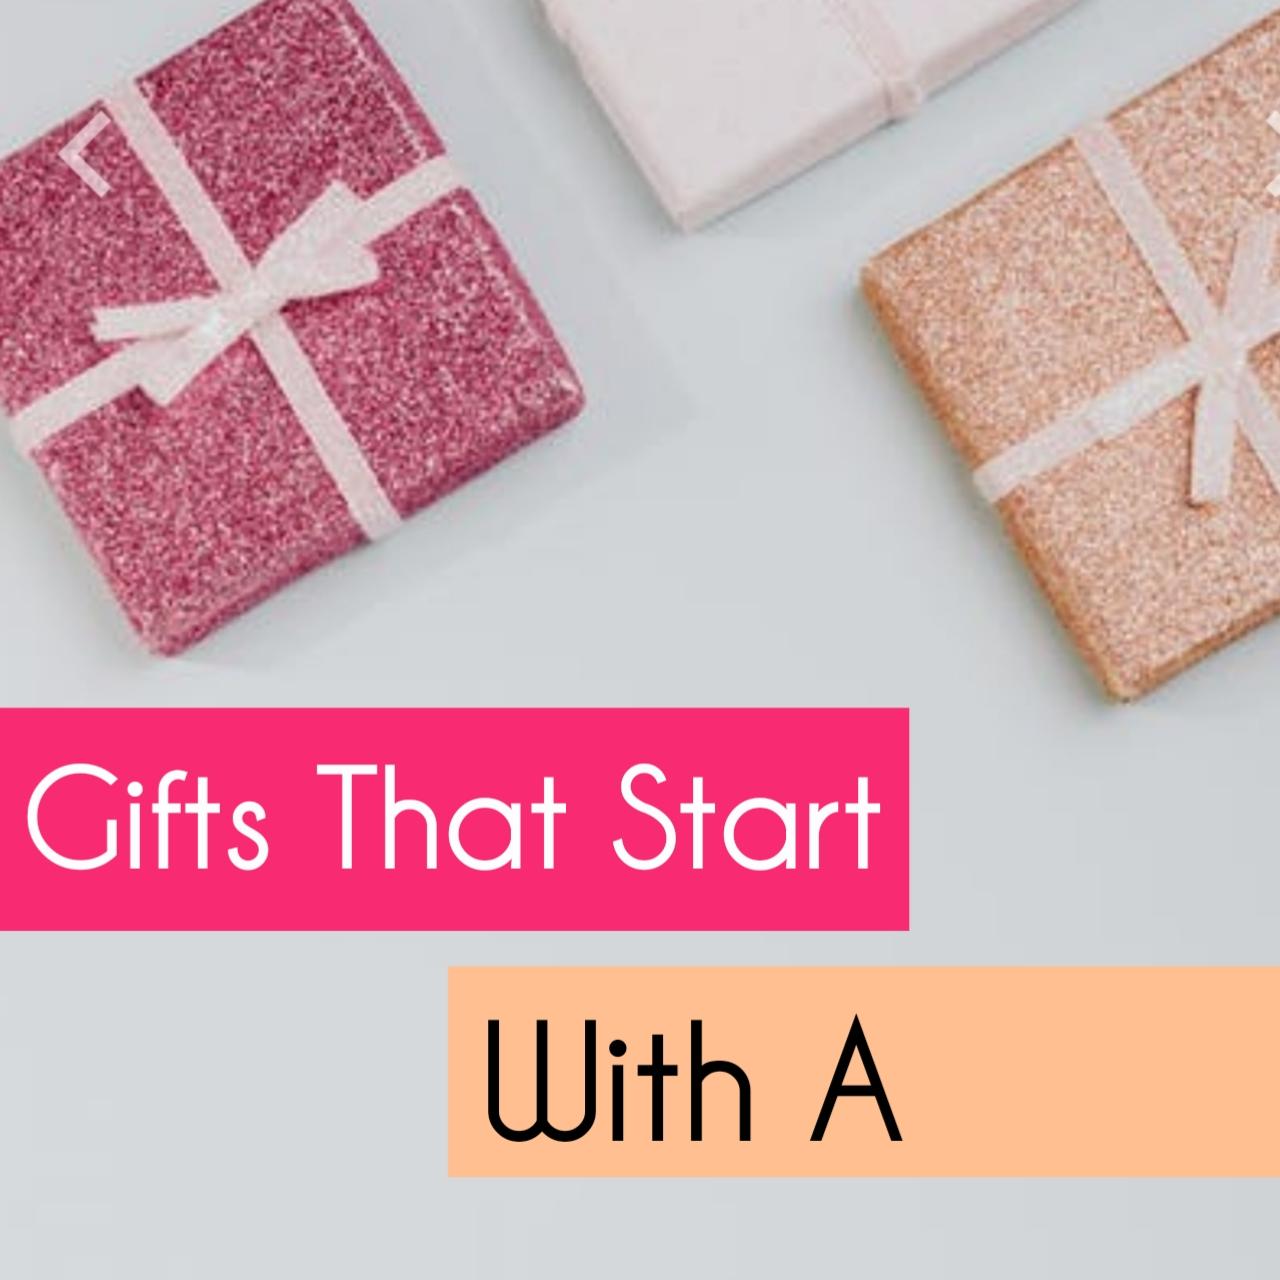 Gifts that start with A